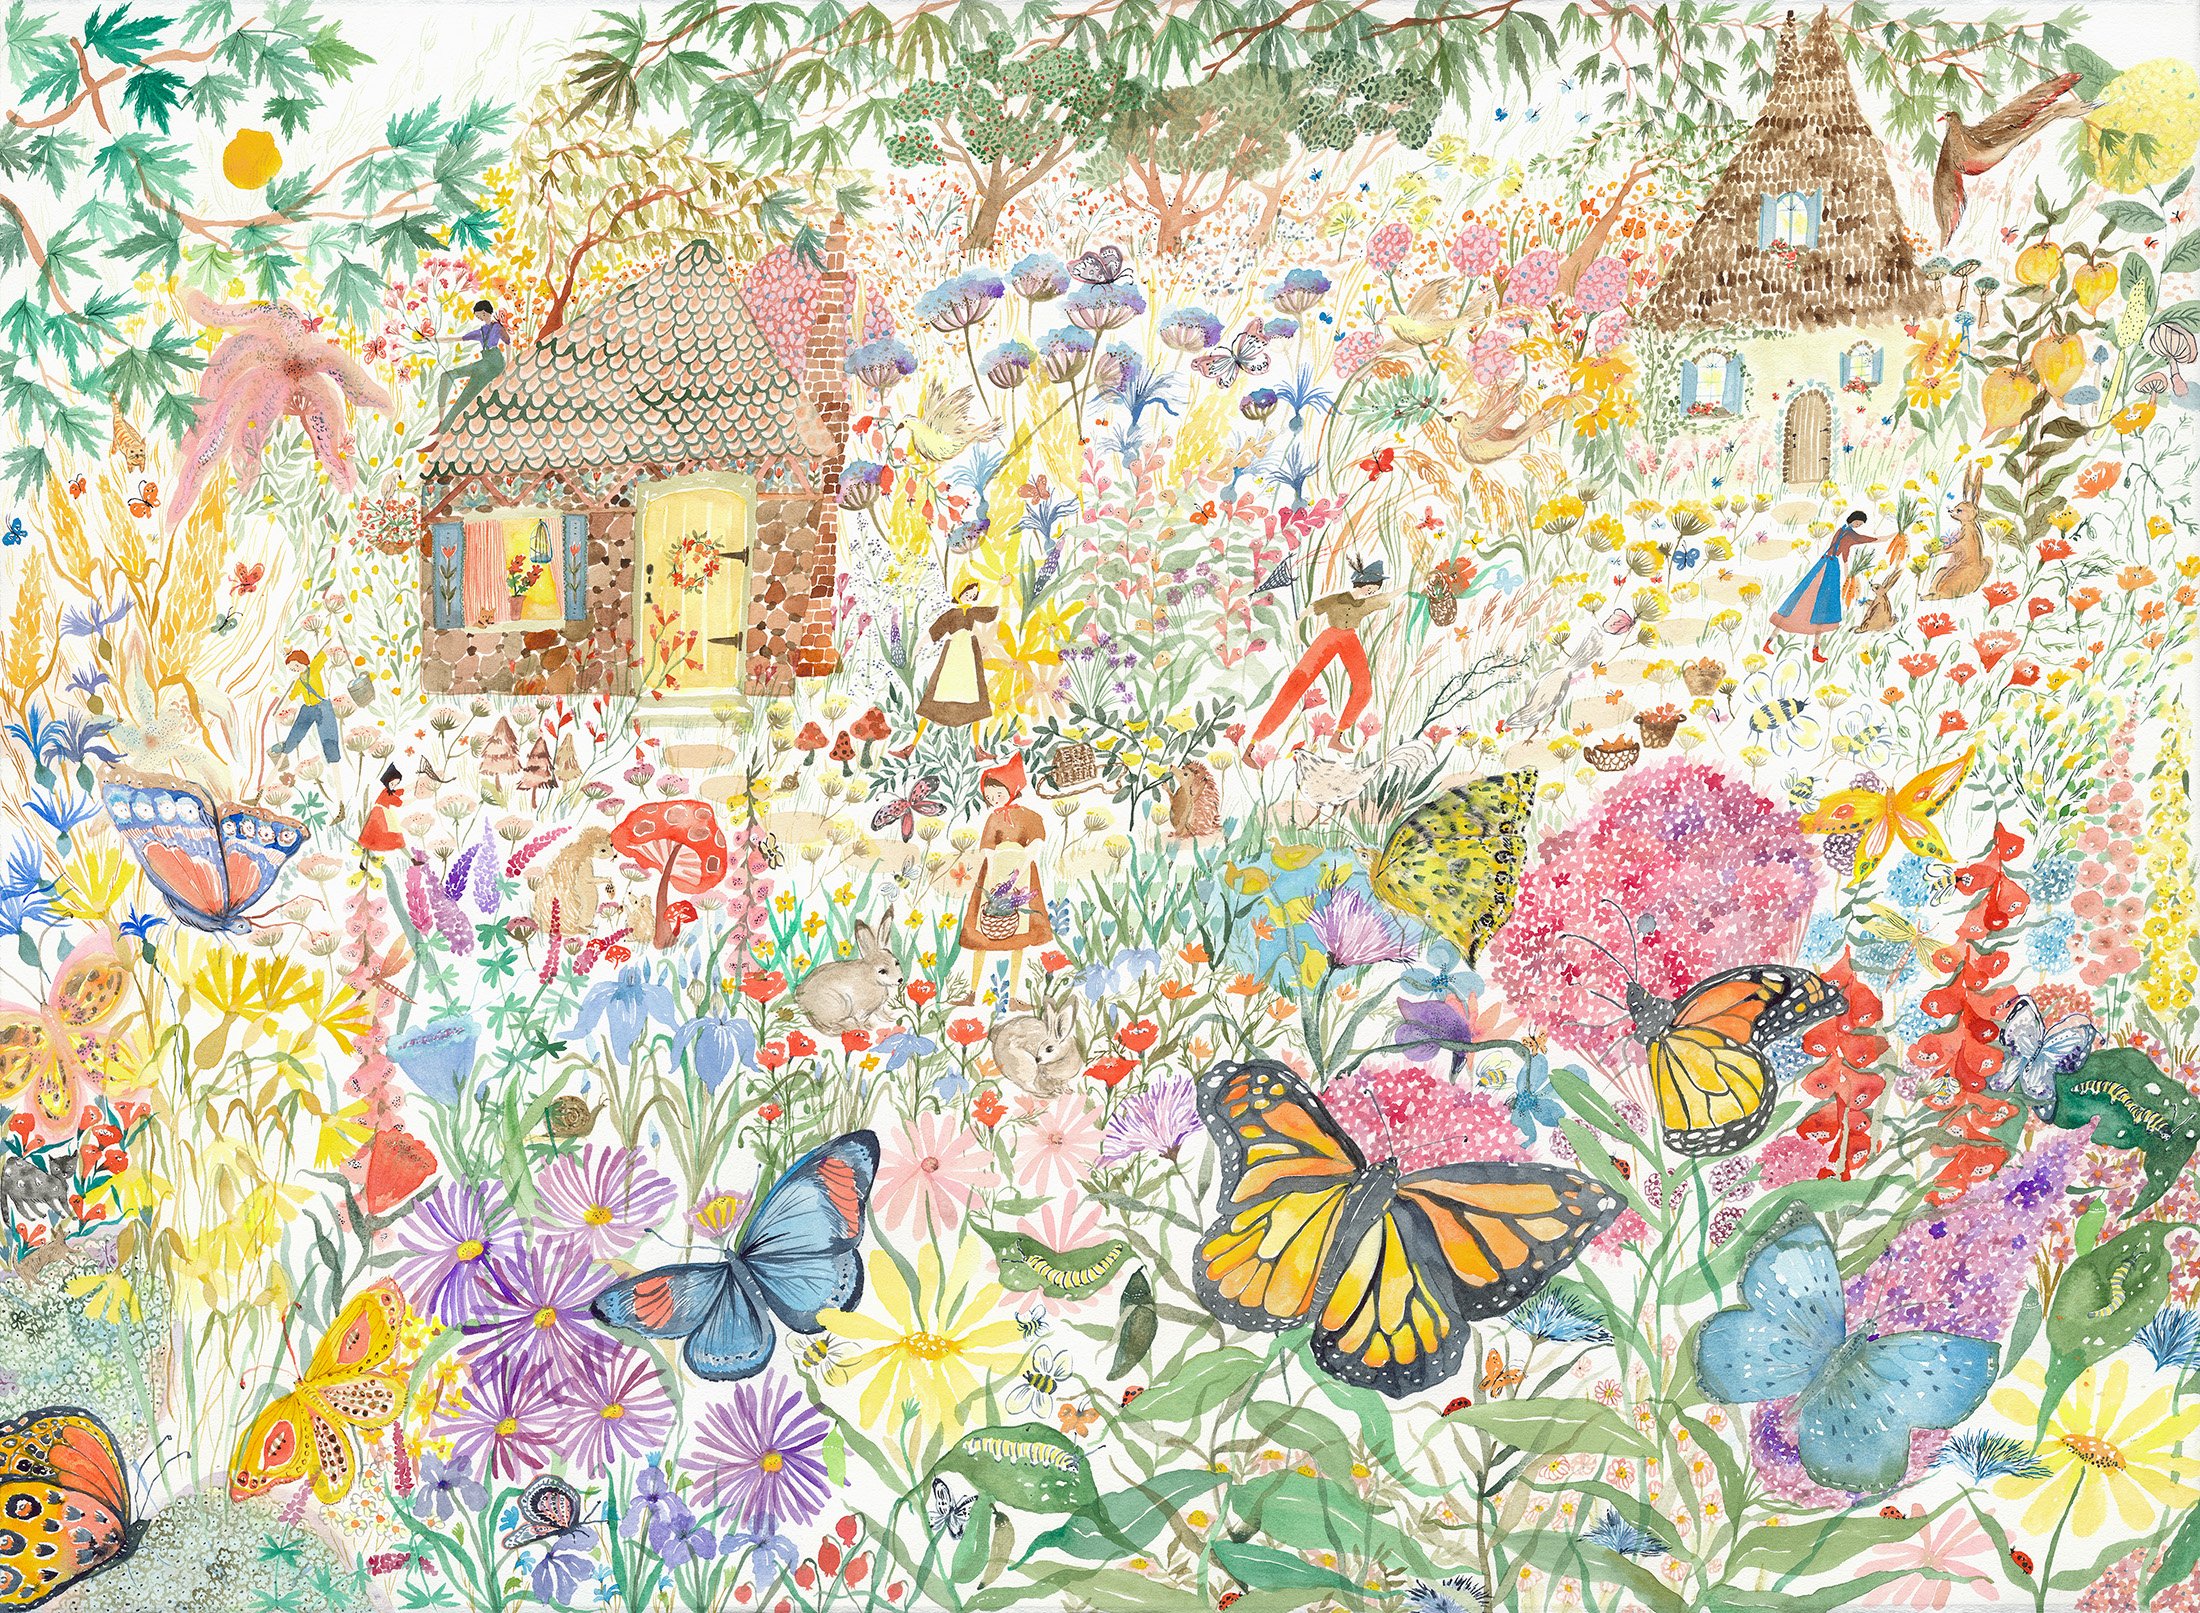   Butterfly Garden   Watercolor on paper, 2023  22” x 30”  $3500  Sold 